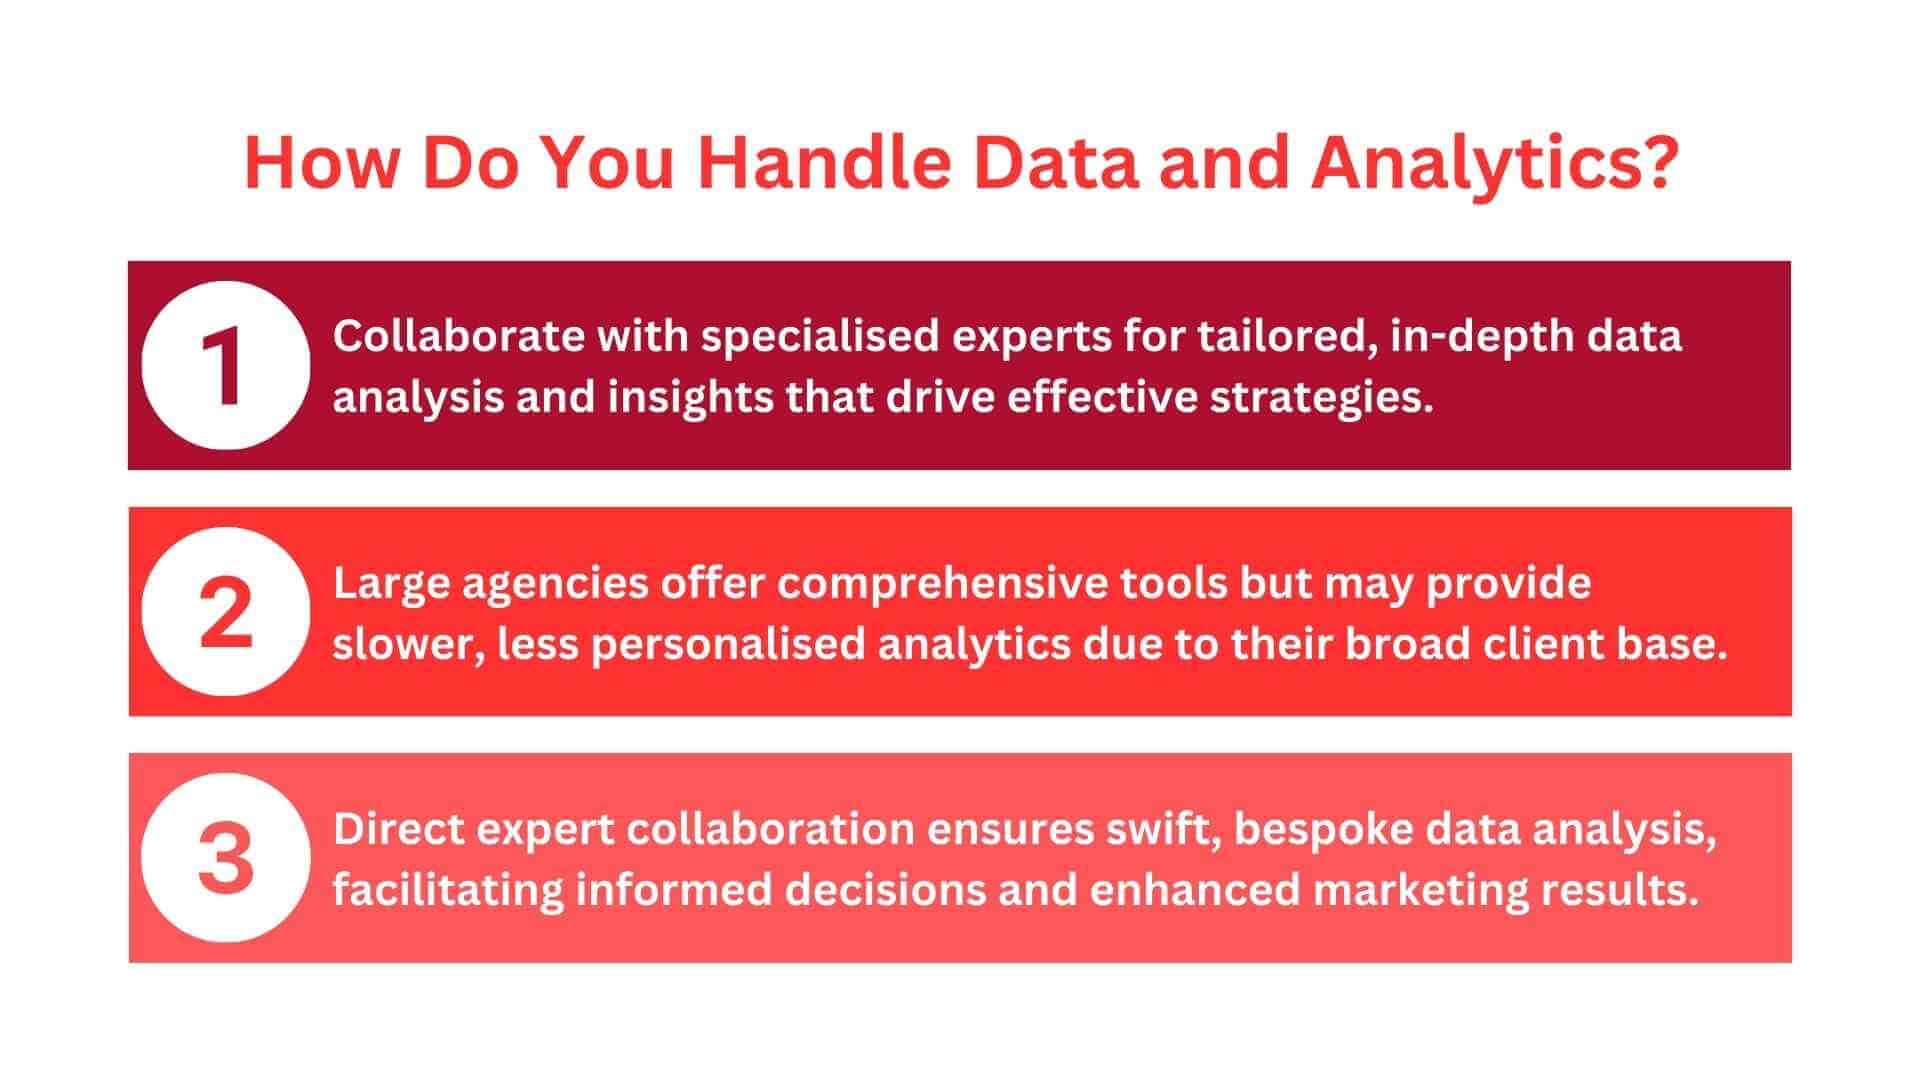 How Do You Handle Data and Analytics?